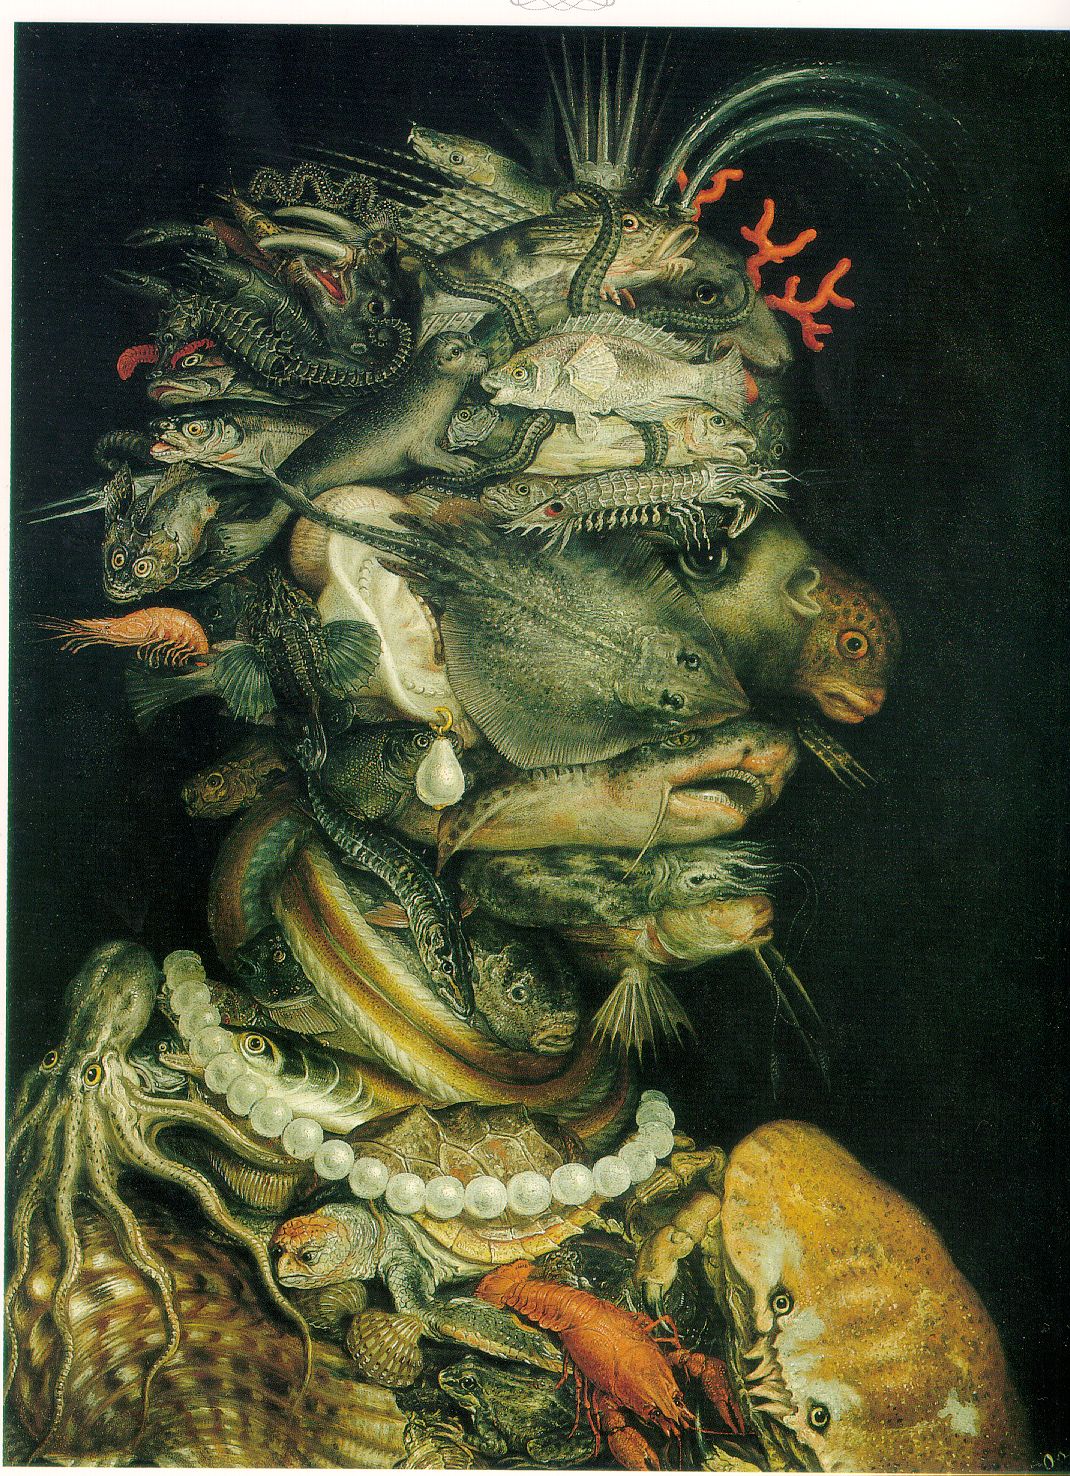 ca. 1566 by Arcimboldo Art Sculpture Paintings Museum Surreal Details about   The Librarian 